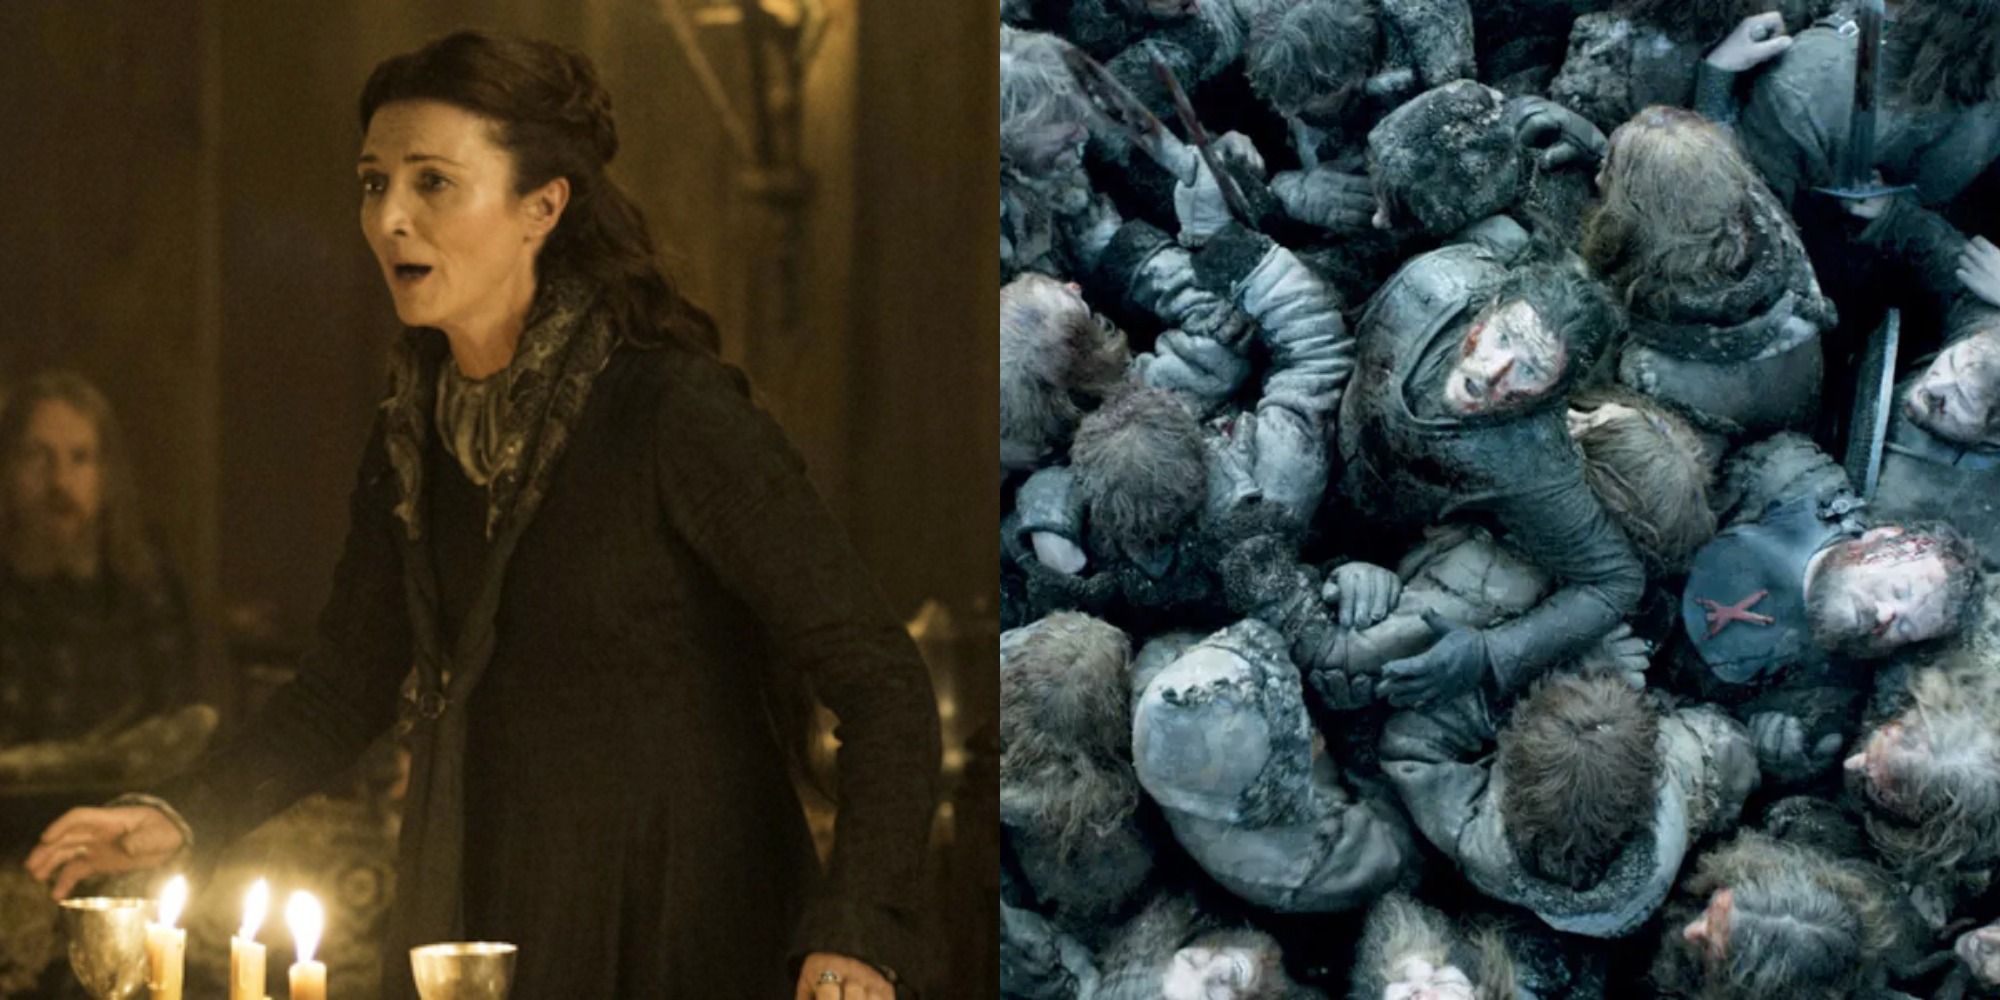 Split image of Catelyn Stark gaping in horror at the Red Wedding and Jon Snow gasping for air during the Battle of the Bastards in Game of Thrones